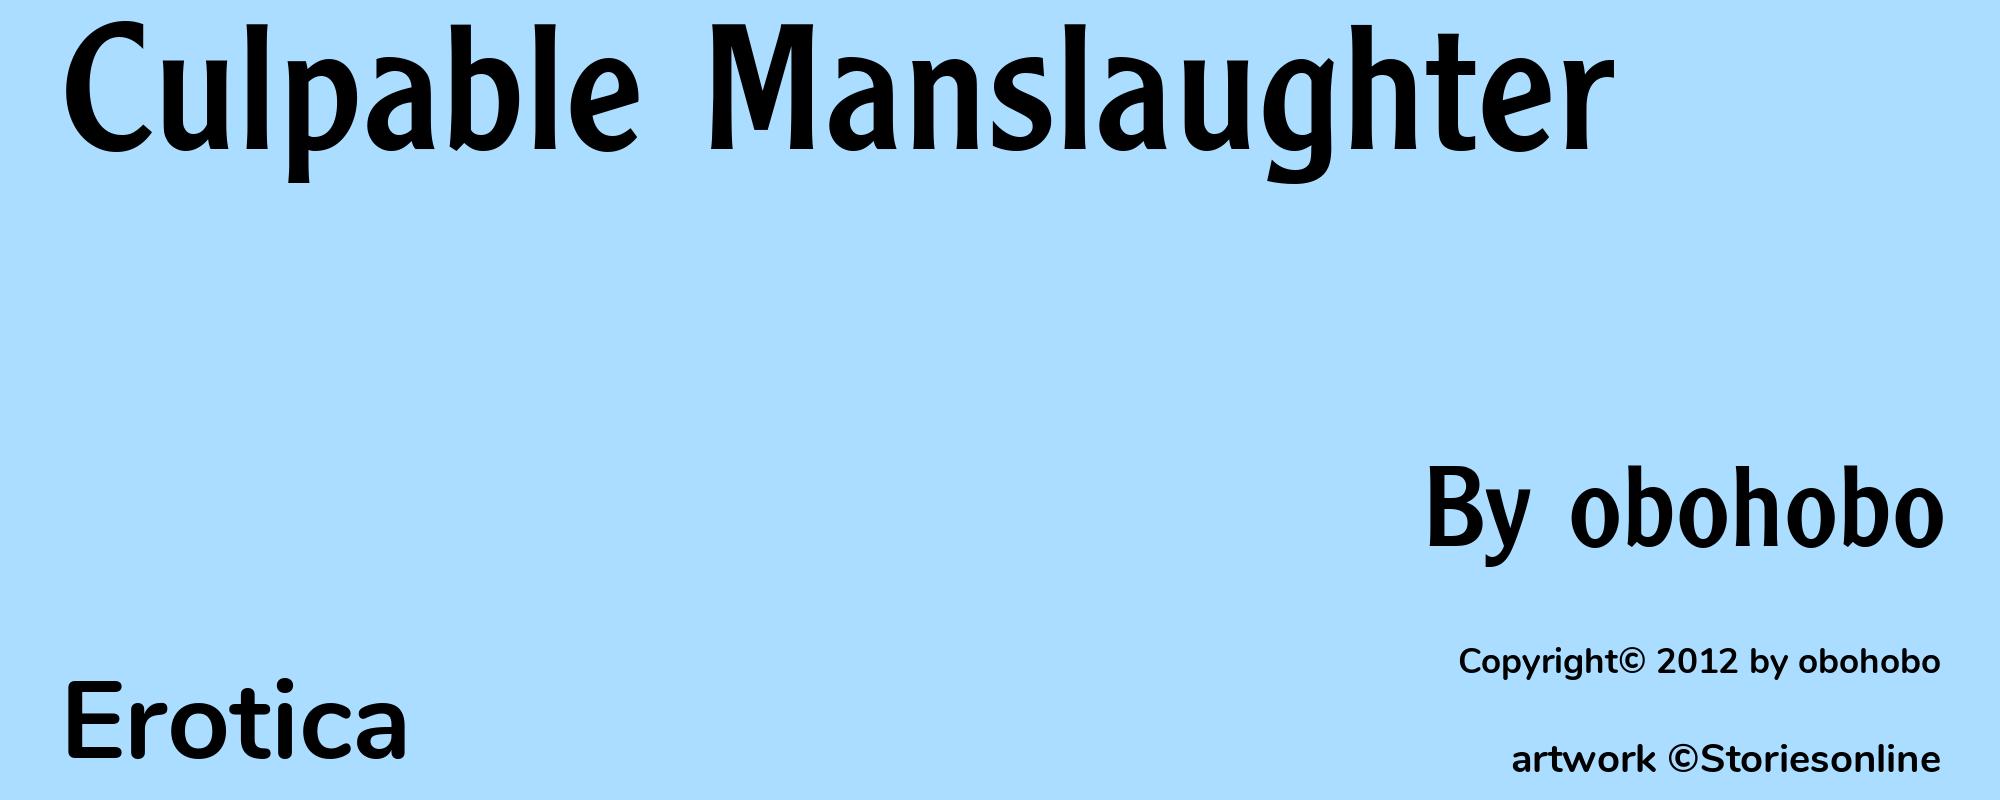 Culpable Manslaughter - Cover